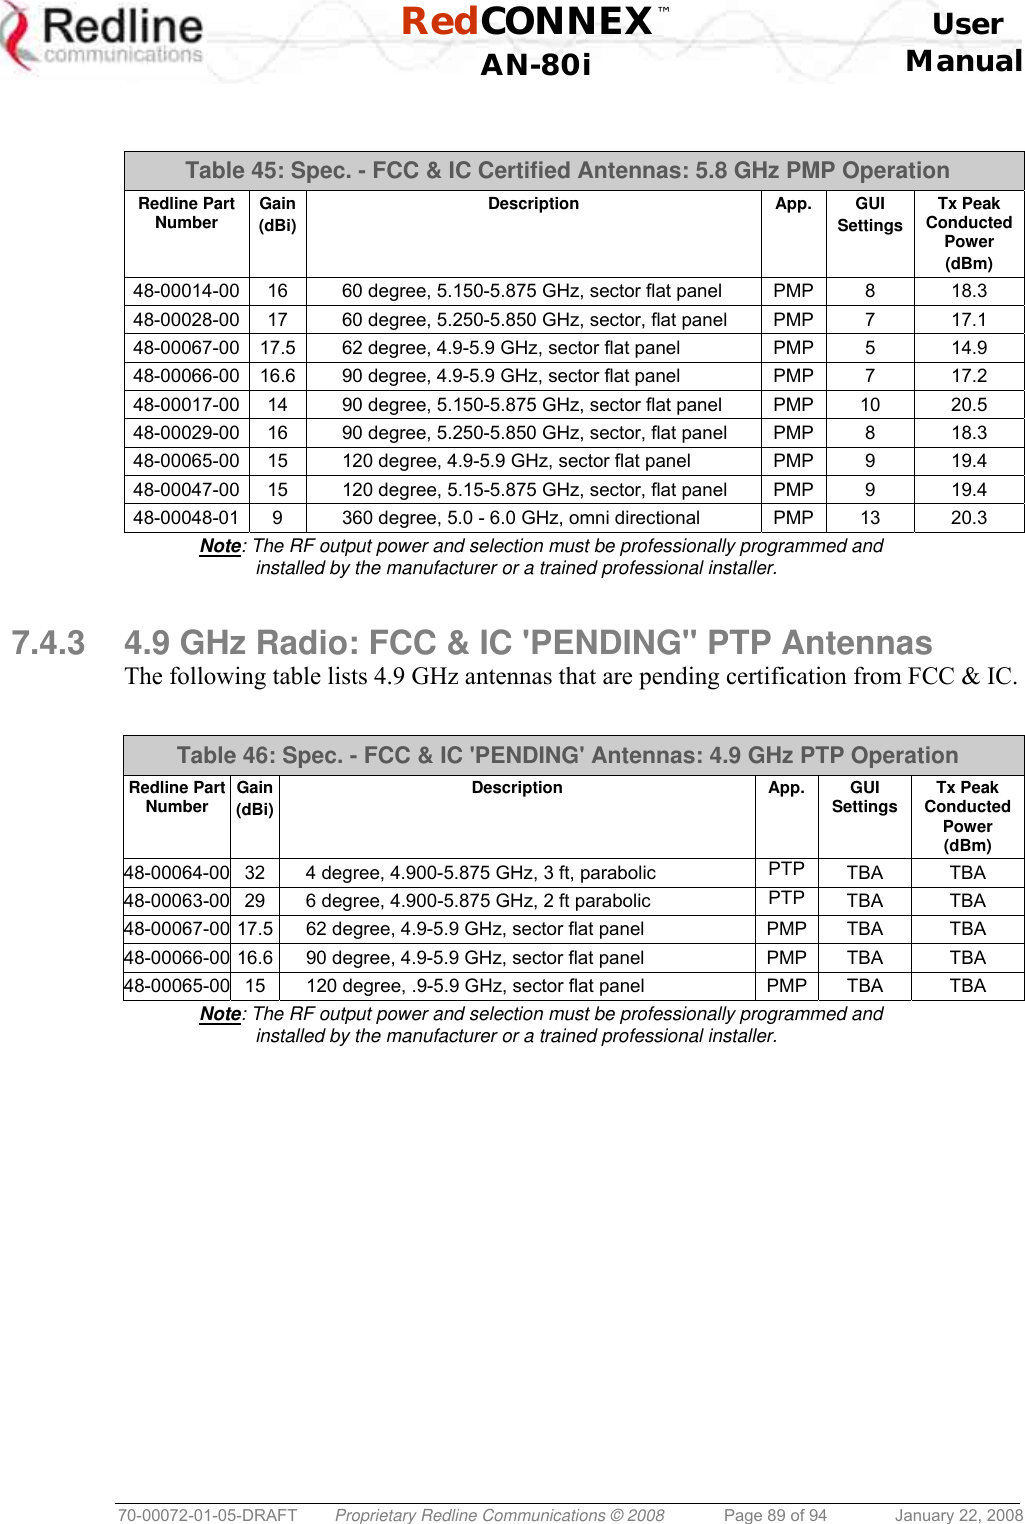  RedCONNEX™    User  AN-80i Manual  70-00072-01-05-DRAFT  Proprietary Redline Communications © 2008  Page 89 of 94  January 22, 2008   Table 45: Spec. - FCC &amp; IC Certified Antennas: 5.8 GHz PMP Operation Redline Part Number  Gain (dBi) Description App. GUI Settings Tx Peak Conducted Power (dBm) 48-00014-00  16  60 degree, 5.150-5.875 GHz, sector flat panel  PMP  8  18.3 48-00028-00  17  60 degree, 5.250-5.850 GHz, sector, flat panel  PMP  7  17.1 48-00067-00  17.5  62 degree, 4.9-5.9 GHz, sector flat panel  PMP  5  14.9 48-00066-00  16.6  90 degree, 4.9-5.9 GHz, sector flat panel  PMP  7  17.2 48-00017-00  14  90 degree, 5.150-5.875 GHz, sector flat panel  PMP  10  20.5 48-00029-00  16  90 degree, 5.250-5.850 GHz, sector, flat panel  PMP  8  18.3 48-00065-00  15  120 degree, 4.9-5.9 GHz, sector flat panel  PMP  9  19.4 48-00047-00  15  120 degree, 5.15-5.875 GHz, sector, flat panel  PMP  9  19.4 48-00048-01  9  360 degree, 5.0 - 6.0 GHz, omni directional  PMP  13  20.3 Note: The RF output power and selection must be professionally programmed and installed by the manufacturer or a trained professional installer.  7.4.3  4.9 GHz Radio: FCC &amp; IC &apos;PENDING&quot; PTP Antennas The following table lists 4.9 GHz antennas that are pending certification from FCC &amp; IC.  Table 46: Spec. - FCC &amp; IC &apos;PENDING&apos; Antennas: 4.9 GHz PTP Operation Redline Part Number  Gain (dBi) Description App. GUI Settings  Tx Peak Conducted Power (dBm) 48-00064-00  32  4 degree, 4.900-5.875 GHz, 3 ft, parabolic  PTP  TBA TBA 48-00063-00  29  6 degree, 4.900-5.875 GHz, 2 ft parabolic  PTP  TBA TBA 48-00067-00 17.5  62 degree, 4.9-5.9 GHz, sector flat panel  PMP  TBA  TBA 48-00066-00 16.6  90 degree, 4.9-5.9 GHz, sector flat panel  PMP  TBA  TBA 48-00065-00  15  120 degree, .9-5.9 GHz, sector flat panel  PMP  TBA  TBA Note: The RF output power and selection must be professionally programmed and installed by the manufacturer or a trained professional installer.  